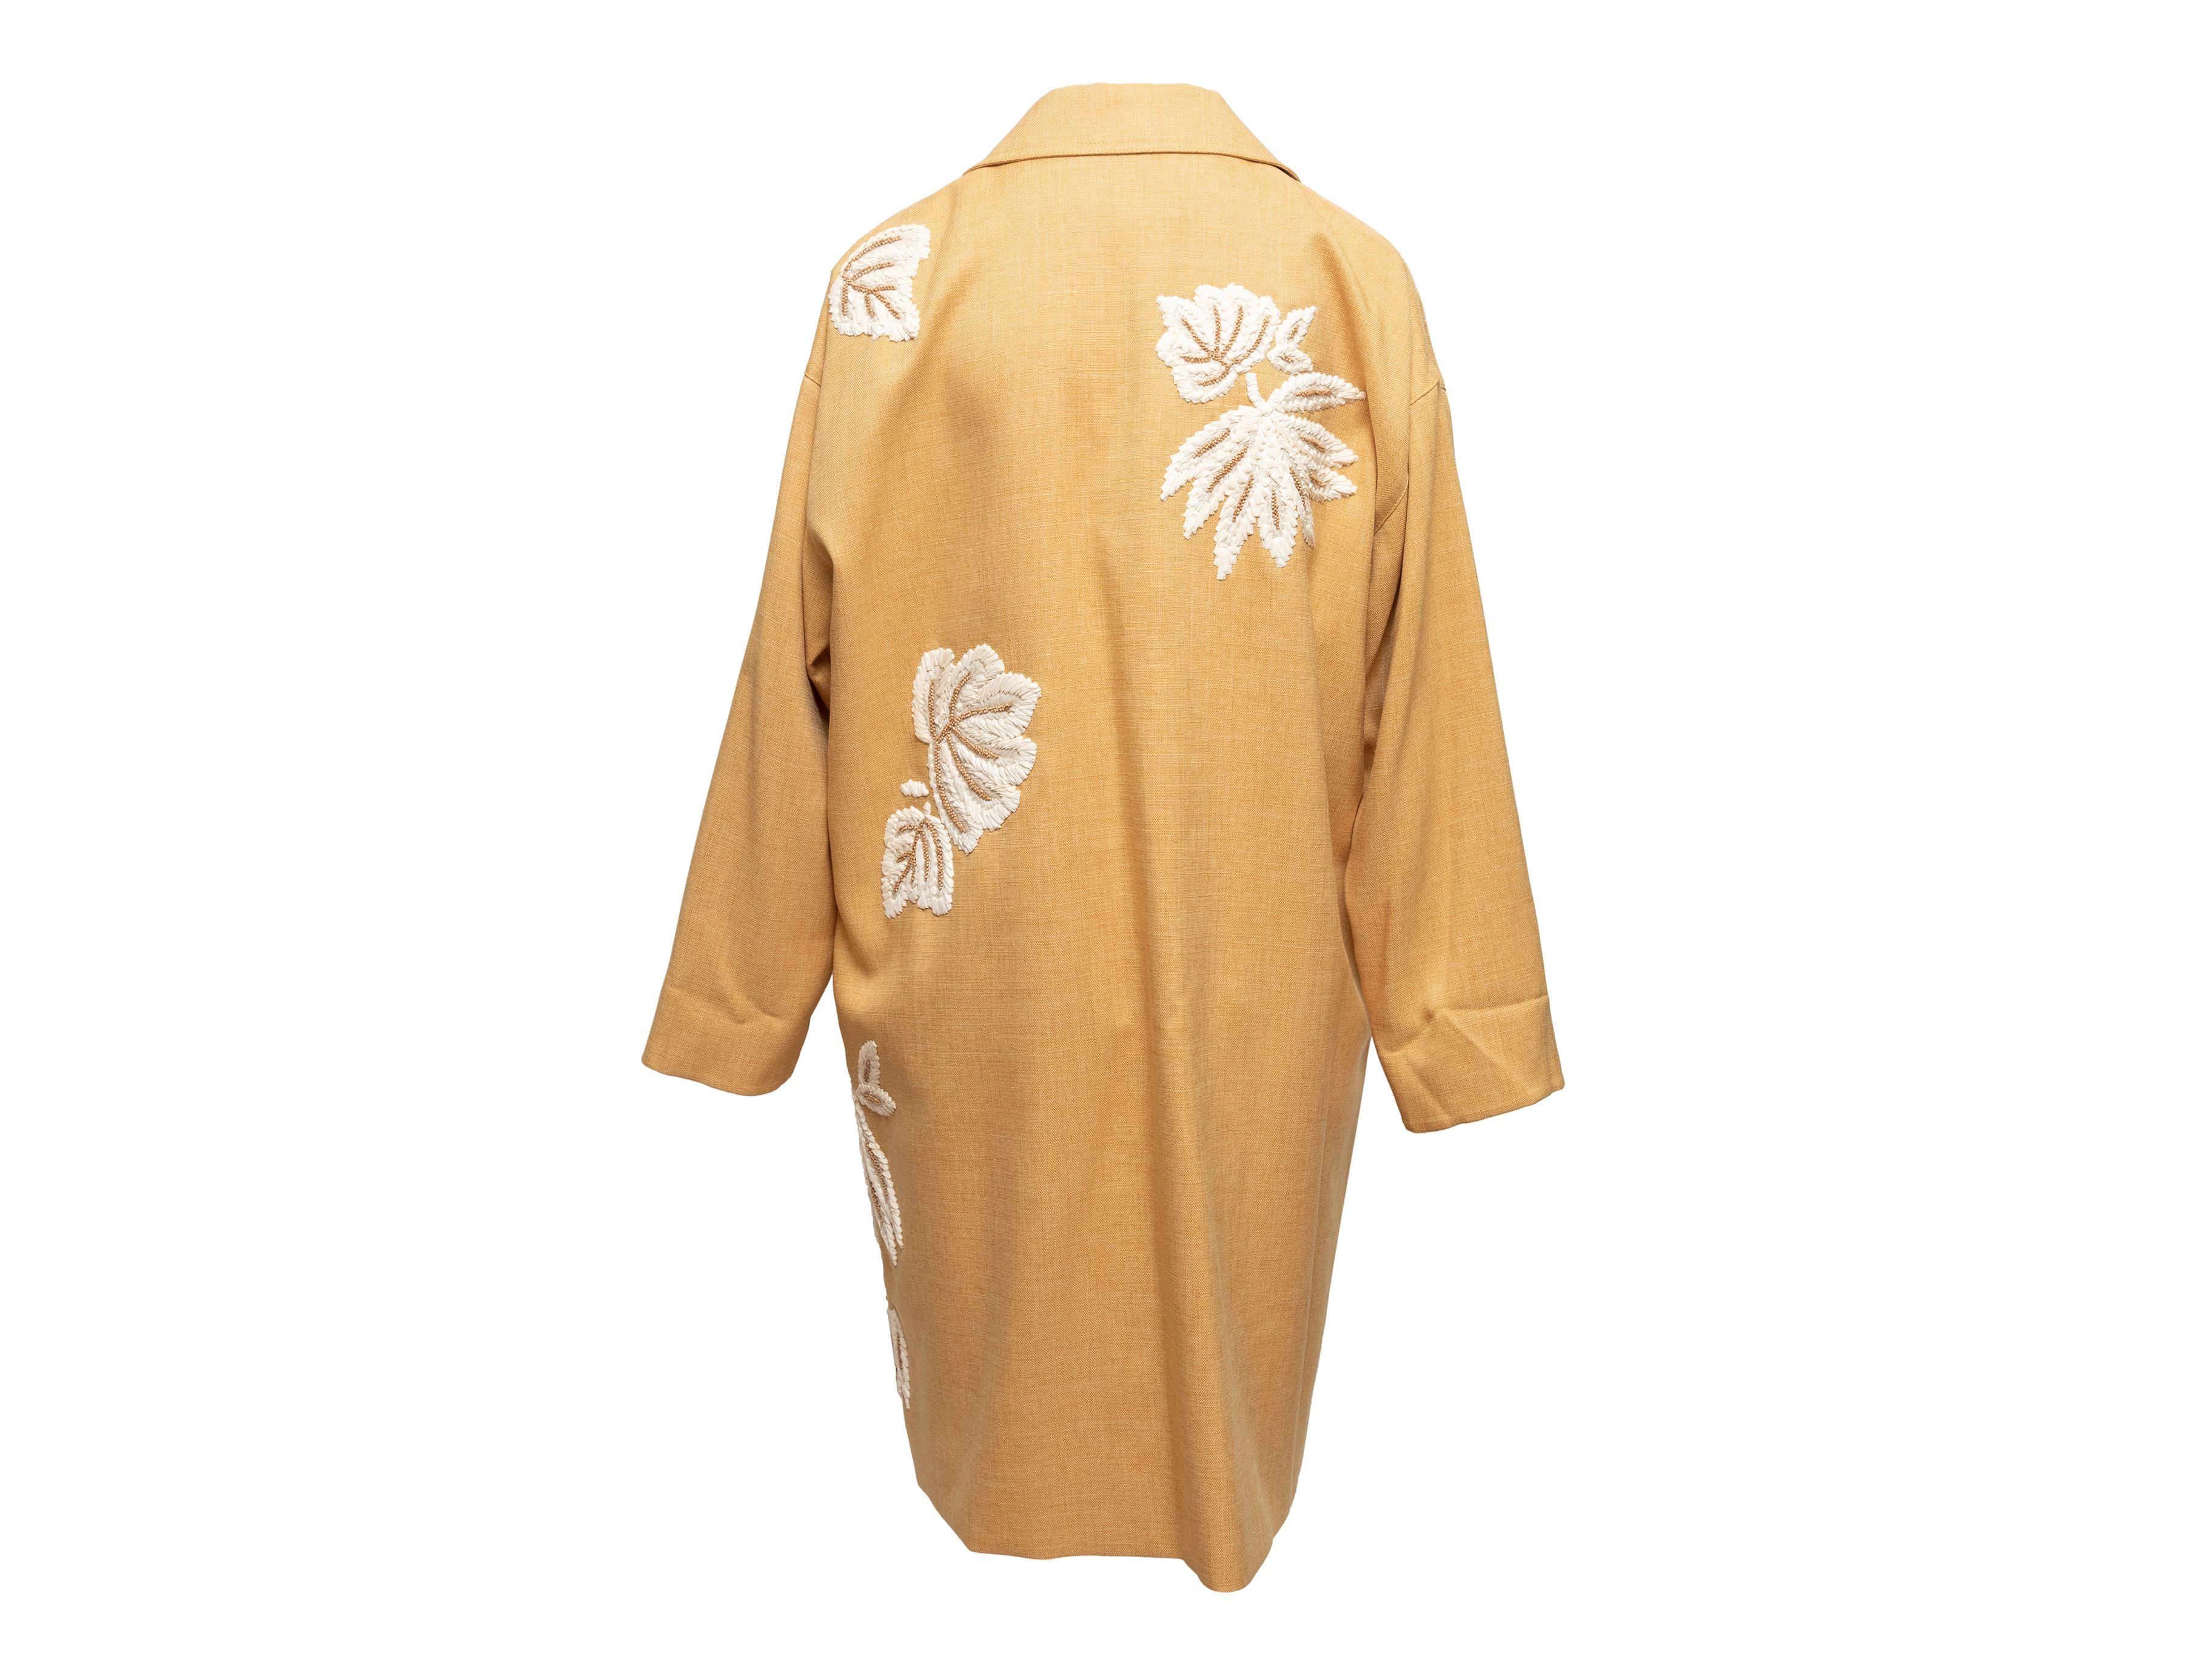 Lafayette 148 Mustard & White Beaded & Embroidered Coat 3